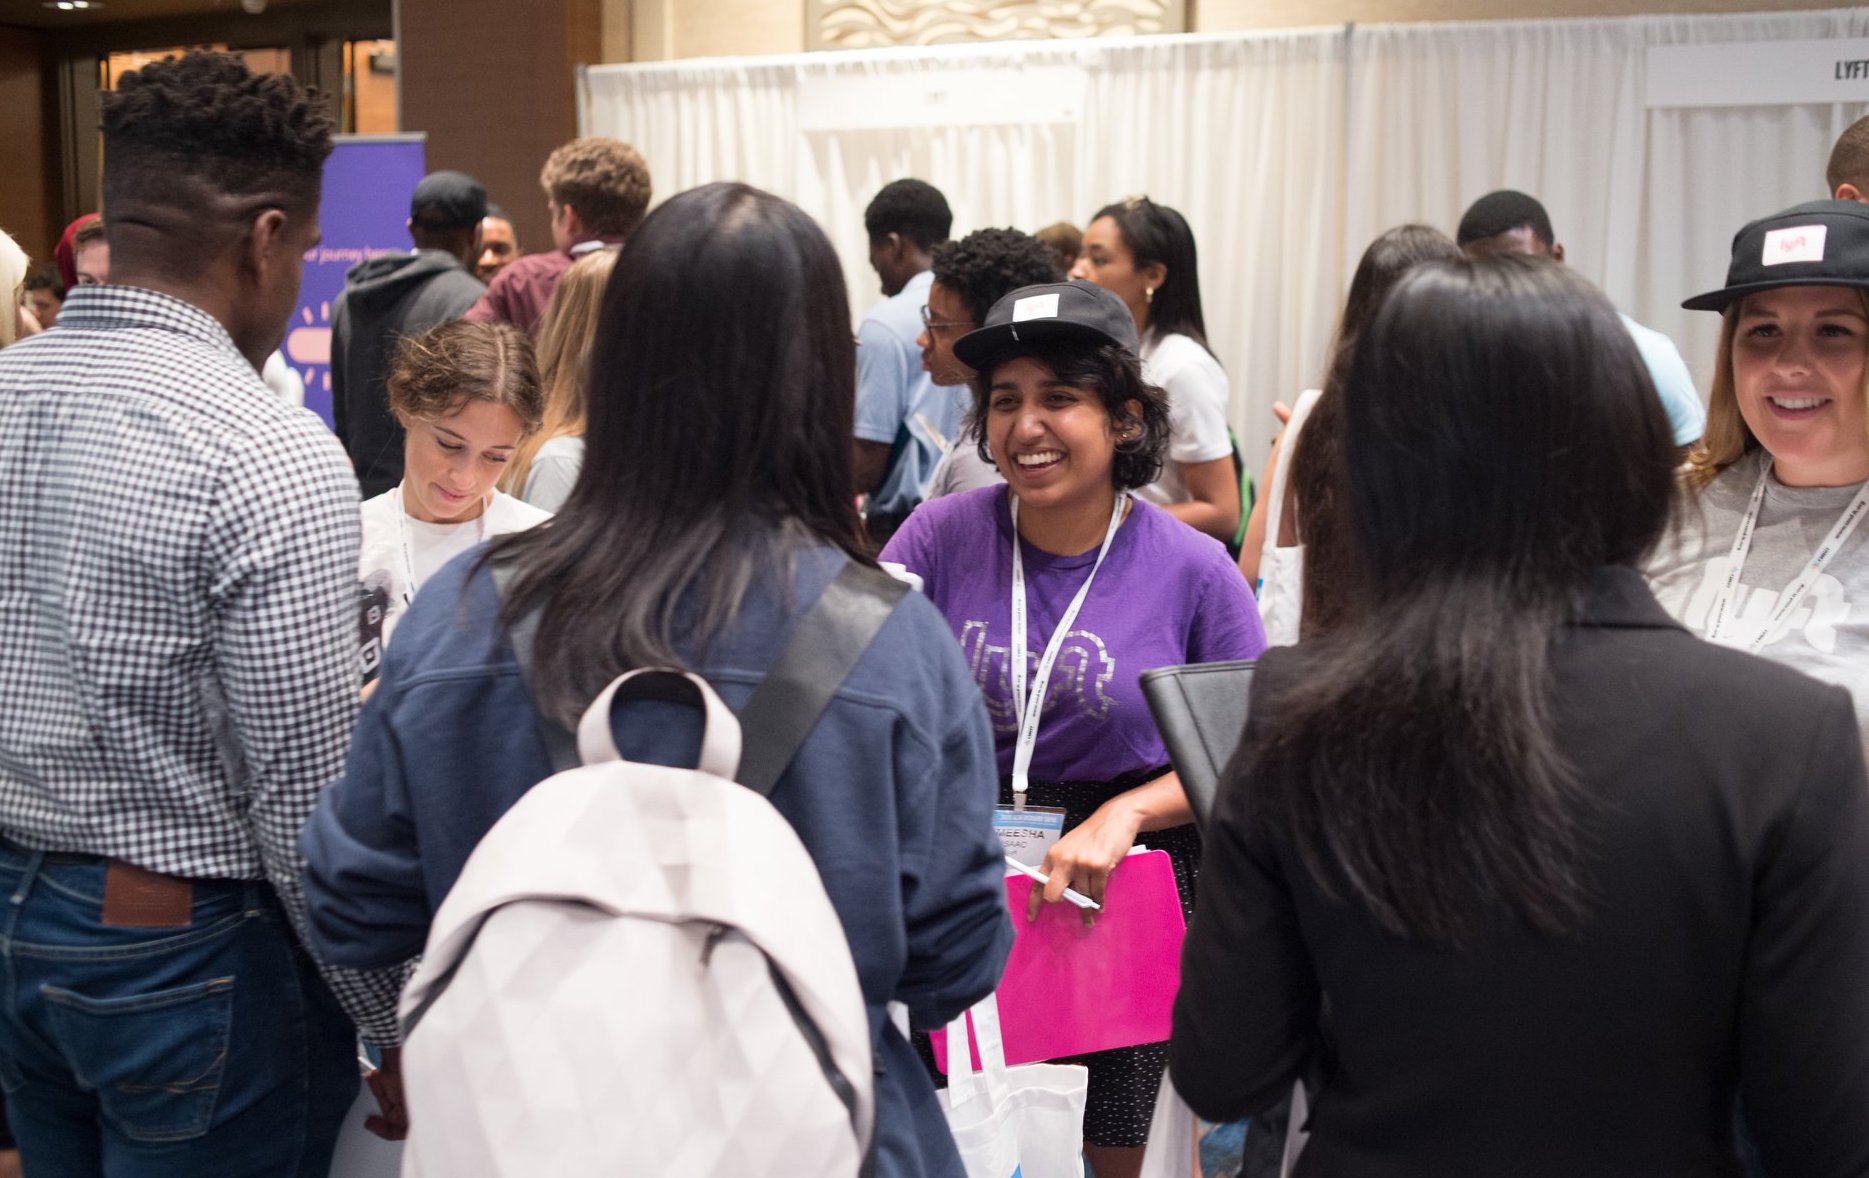 Three conference attendees talking to three industry recruiters at Tapia 2019 Career Fair with other conference attendees in the background